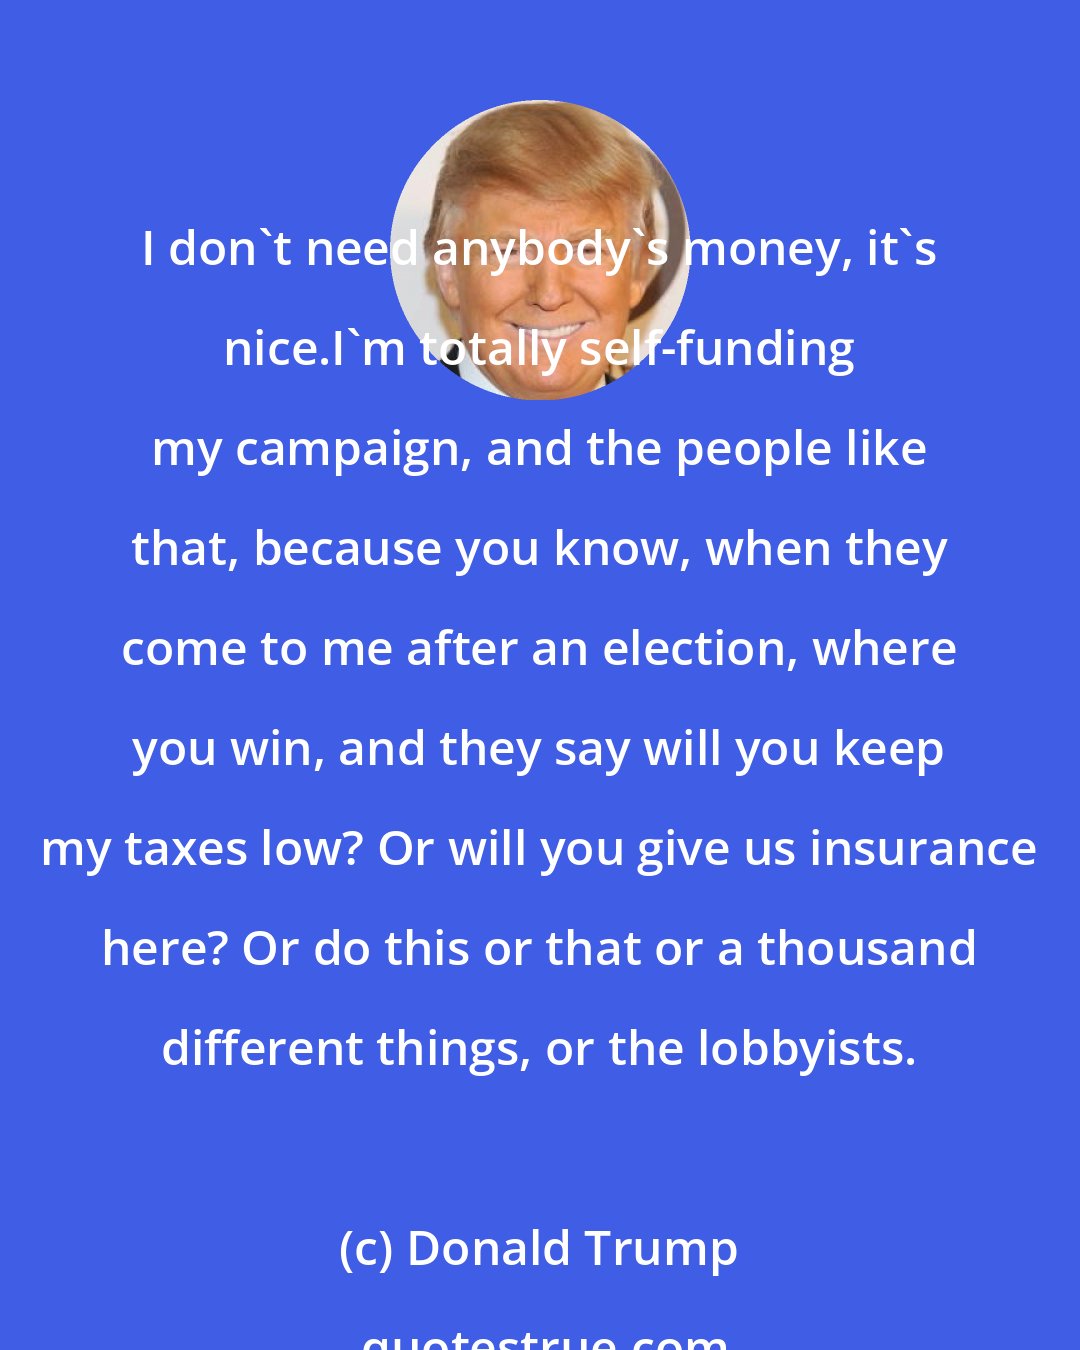 Donald Trump: I don't need anybody's money, it's nice.I'm totally self-funding my campaign, and the people like that, because you know, when they come to me after an election, where you win, and they say will you keep my taxes low? Or will you give us insurance here? Or do this or that or a thousand different things, or the lobbyists.